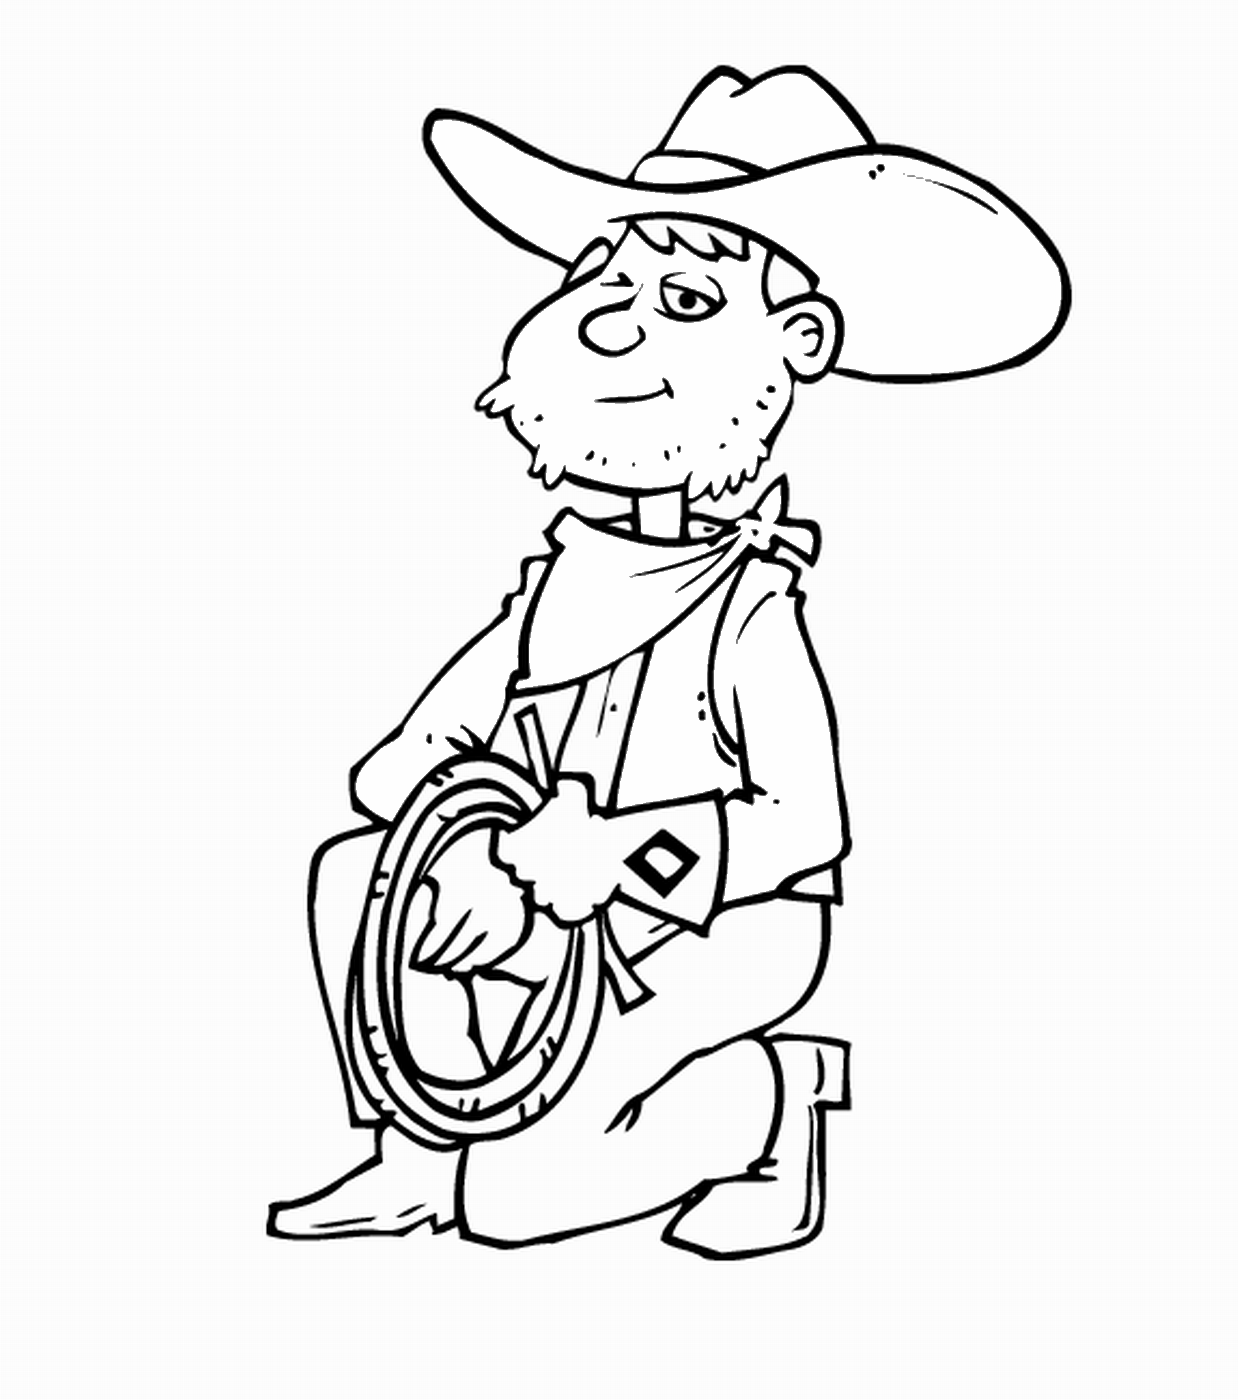 Cowboy Coloring Pages for boys cowboy_10 Printable 2020 0185 Coloring4free